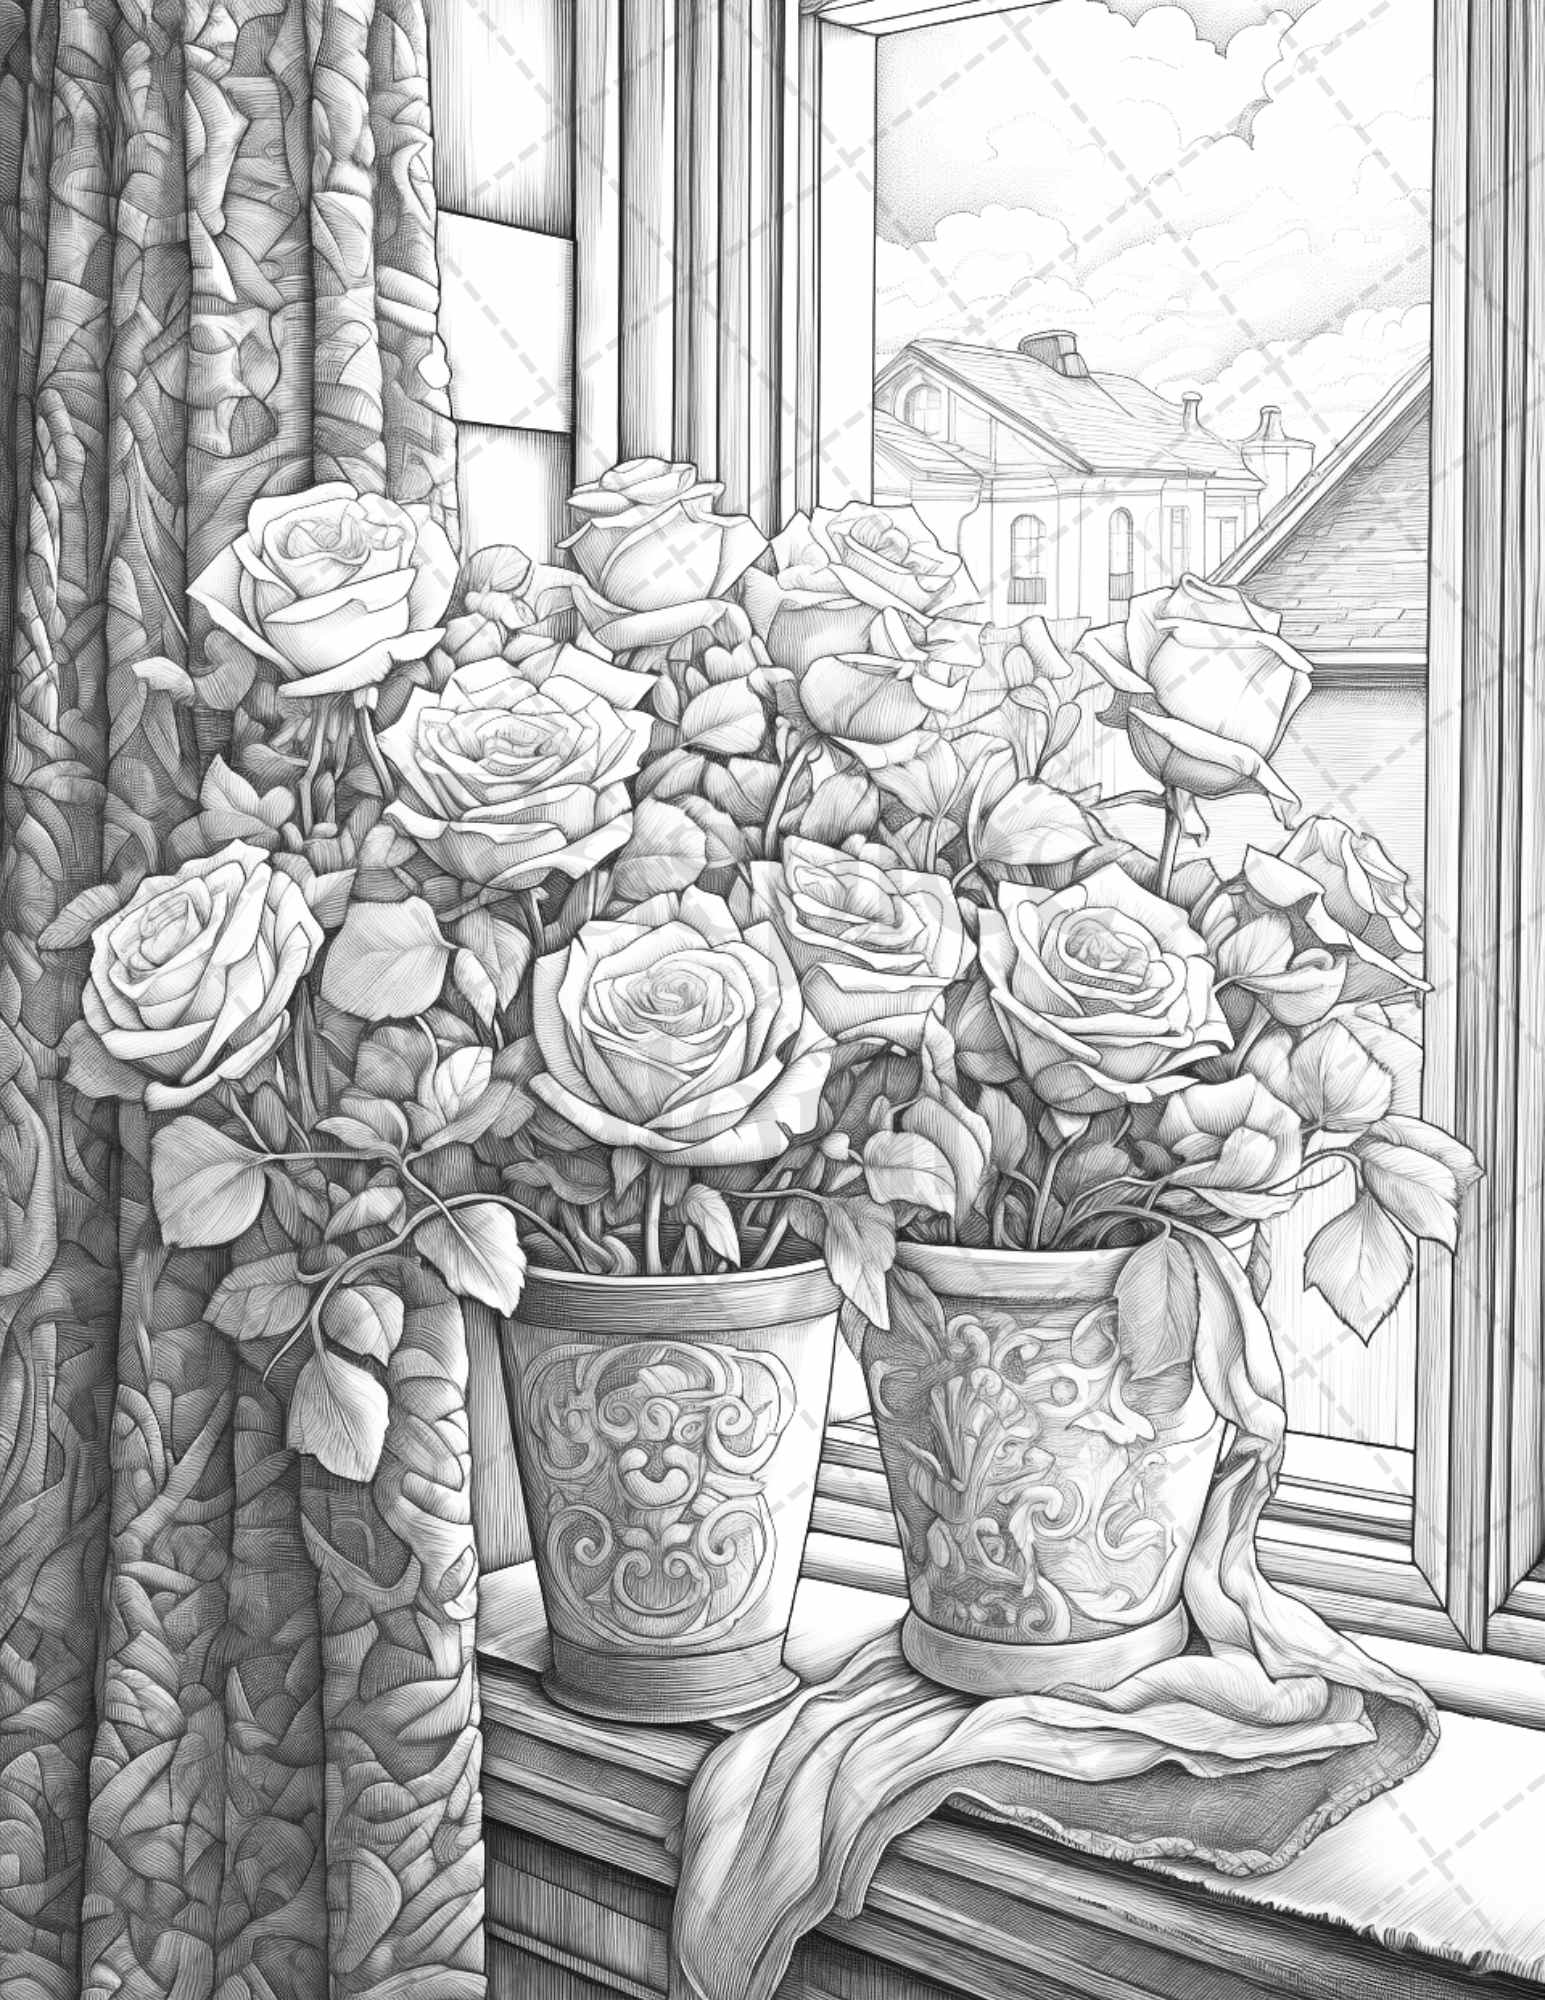 40 Captivating Roses Grayscale Coloring Pages Printable for Adults, PDF File Instant Download - raspiee